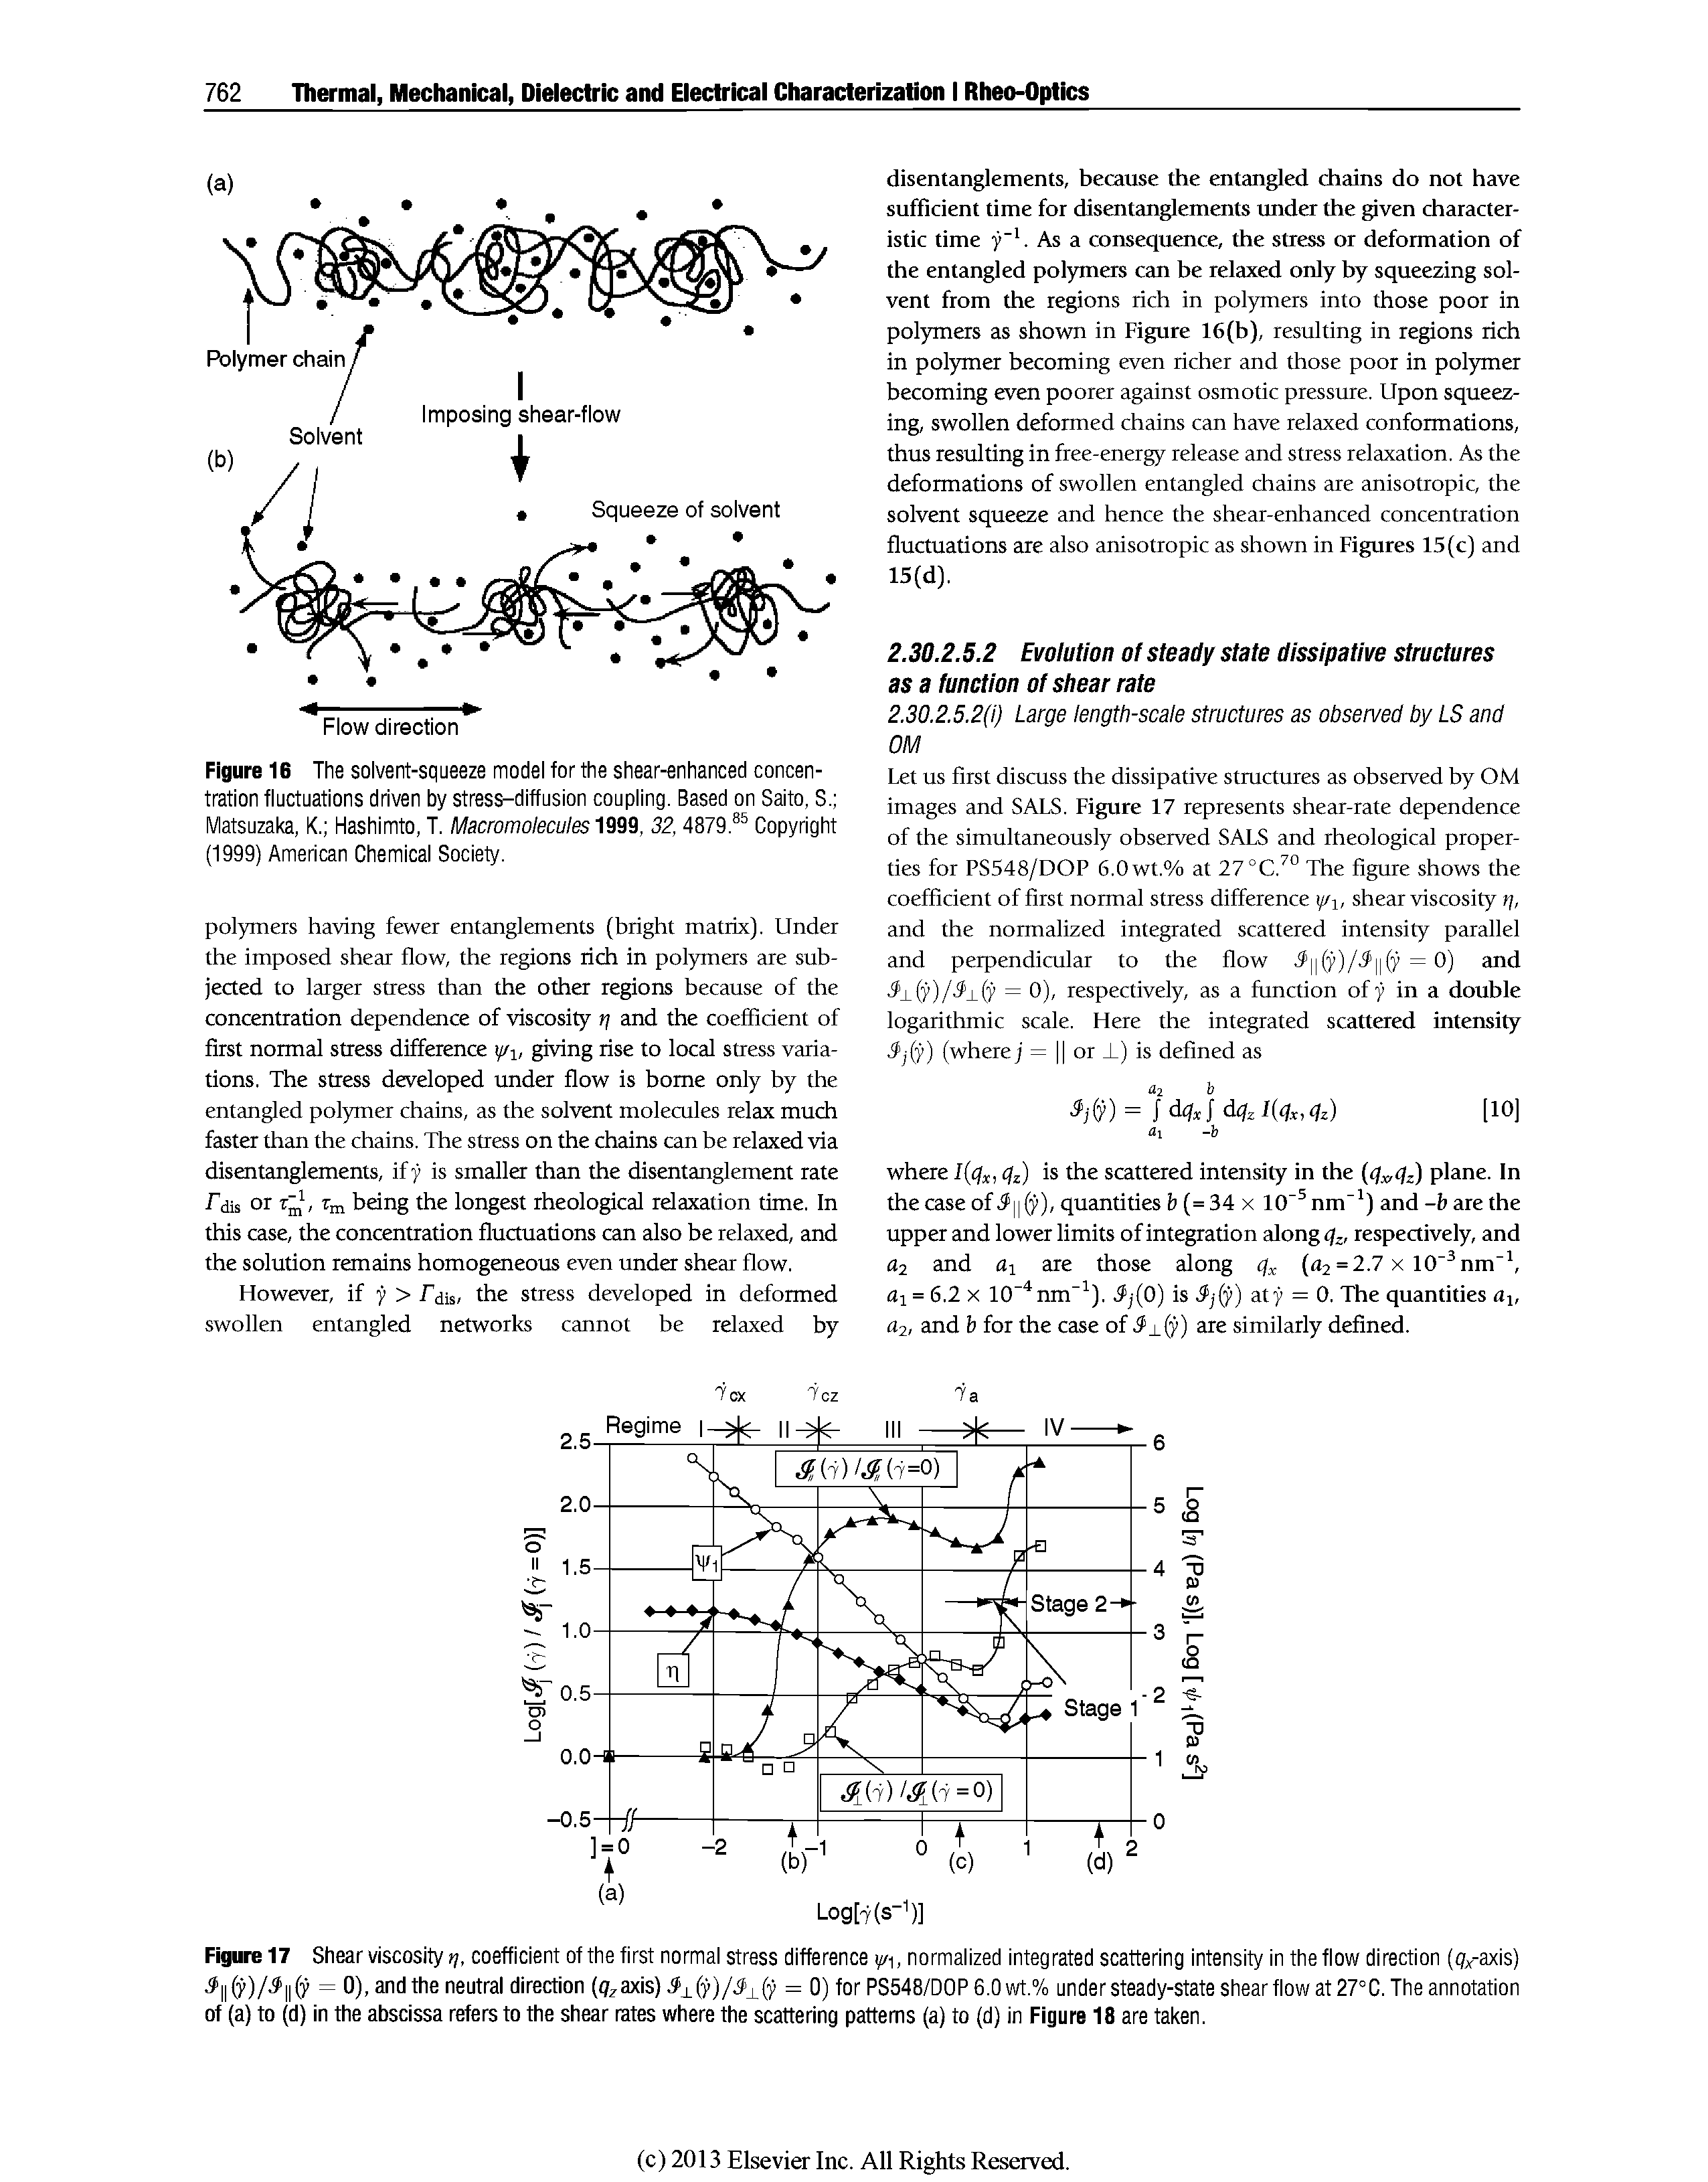 Figure 16 The solvent-squeeze model for the shear-enhanced concentration fluctuations driven by stress-diffusion coupling. Based on Saito, S. Matsuzaka, K. Hashimto, T. Macromolecules 32,4879. Copyright (1999) American Chemical Society.